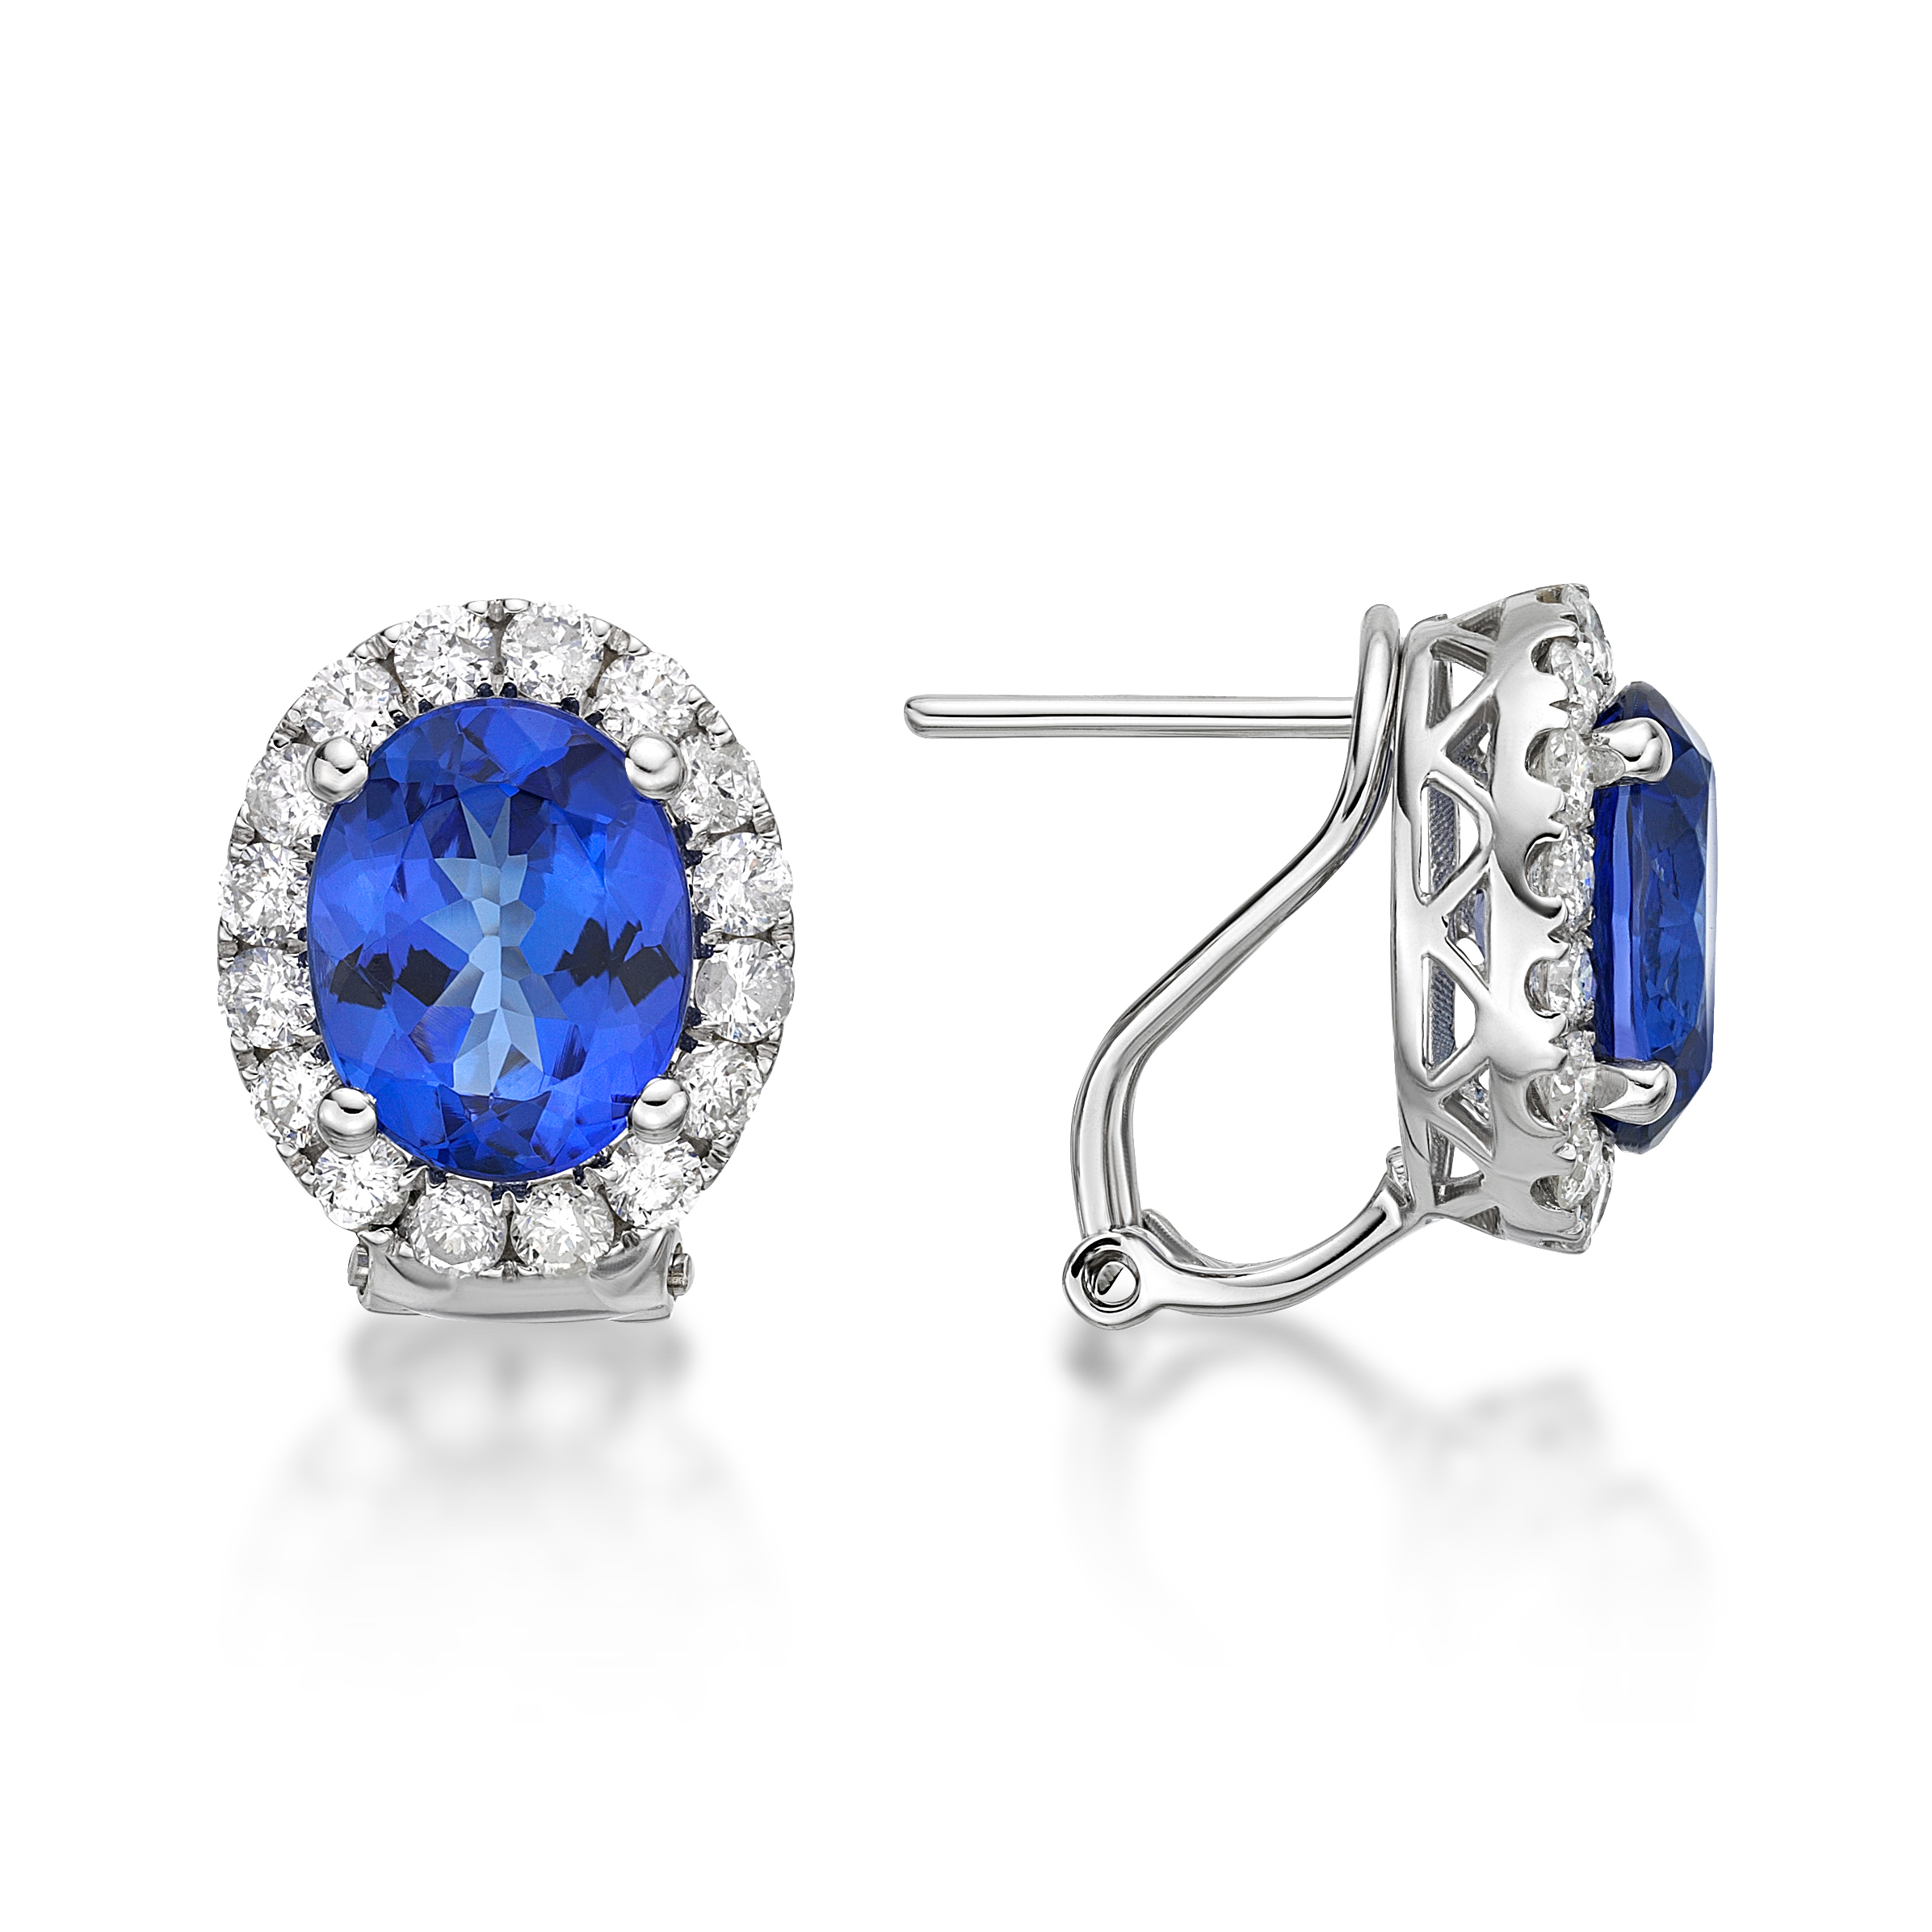 Get the Fancy of Colors on your Ears with Tanzanite Earrings